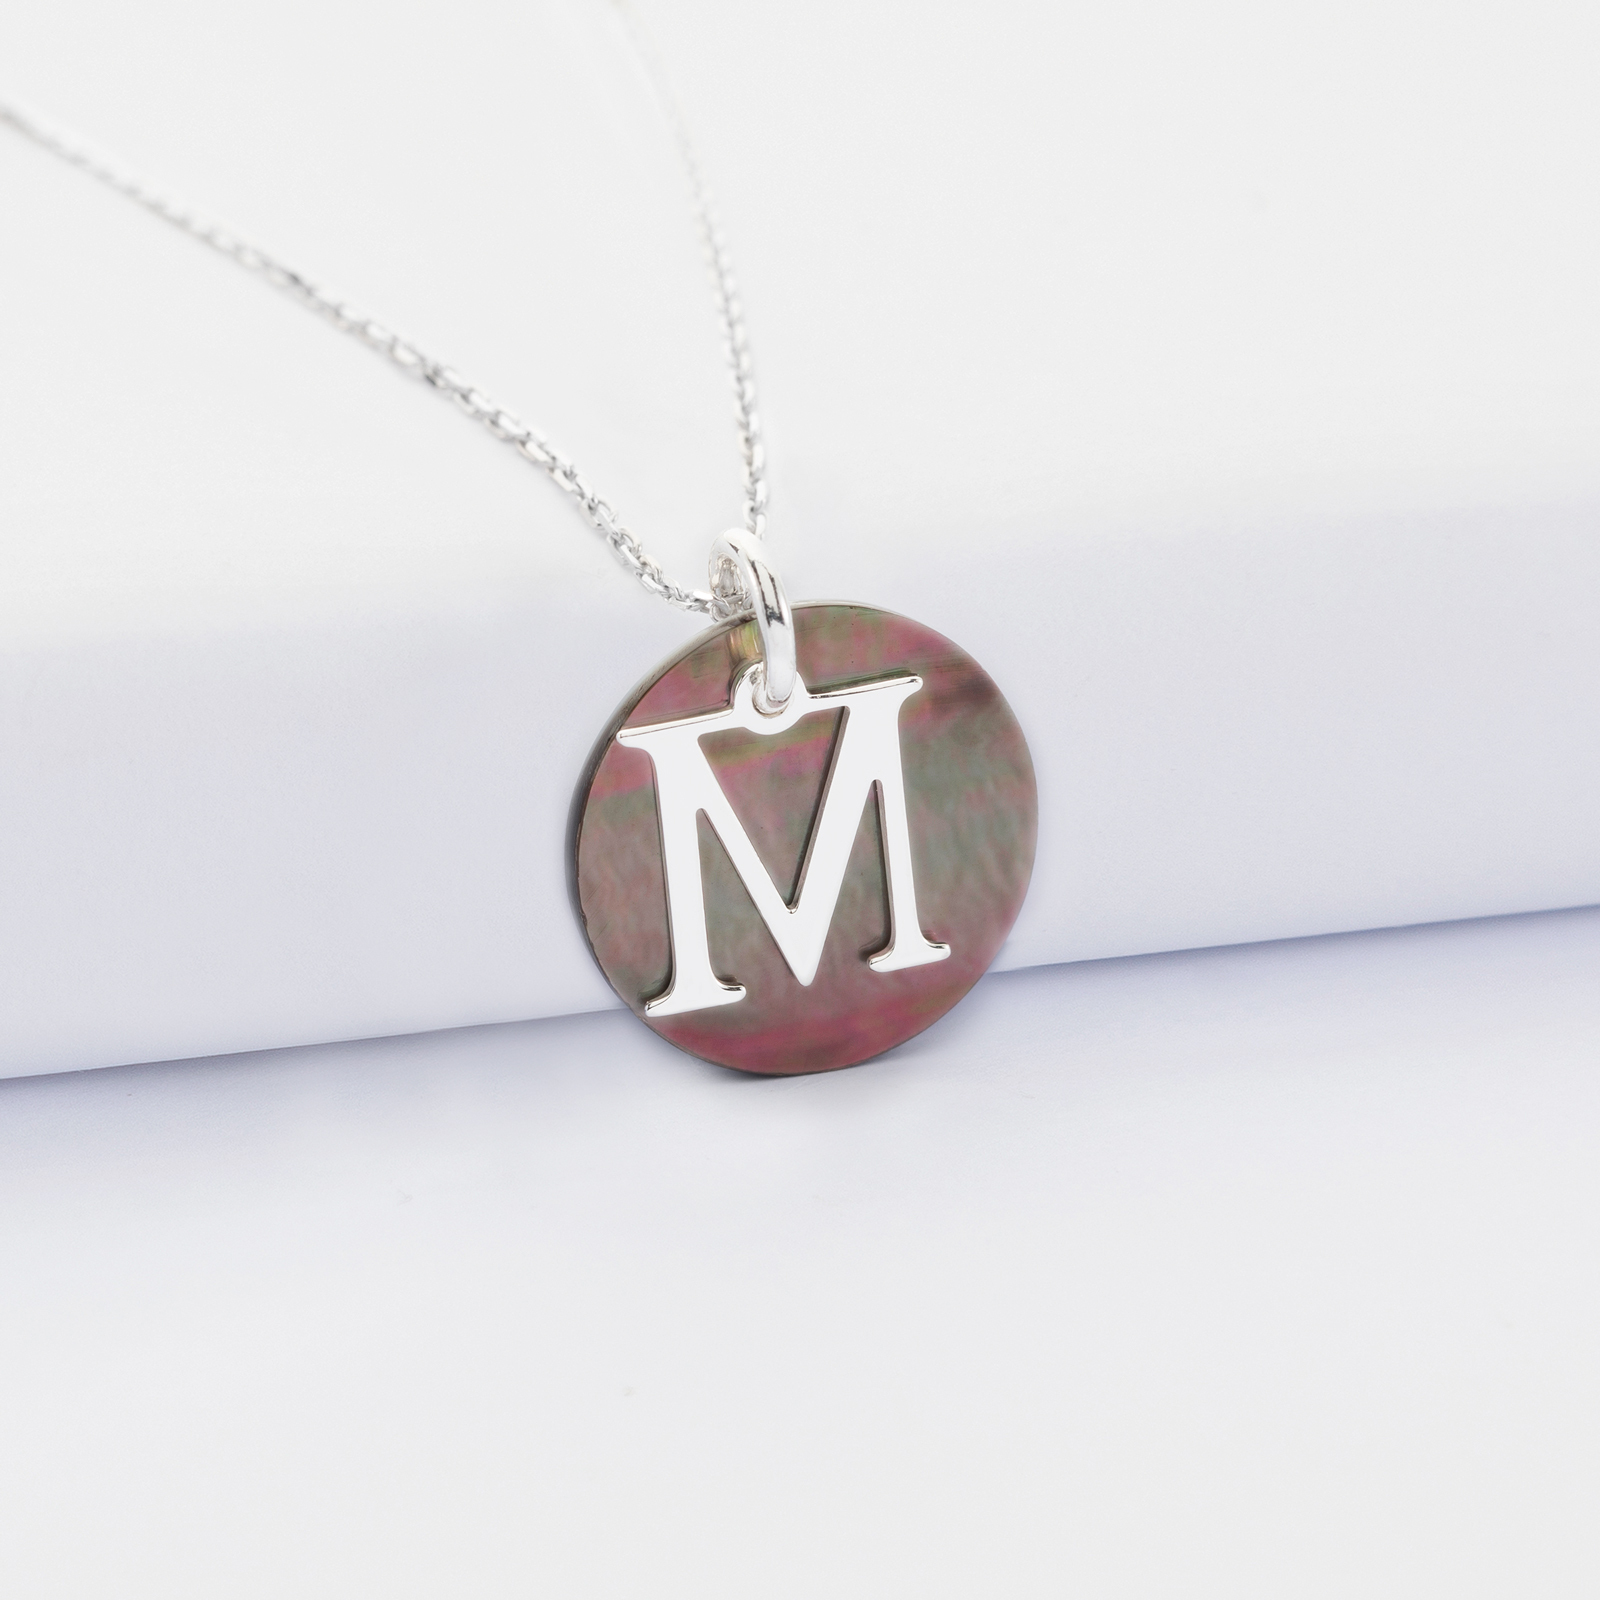 Personalised pendant with silver initial letter medaillon 14 mm and black mother of pearl charm 19 mm